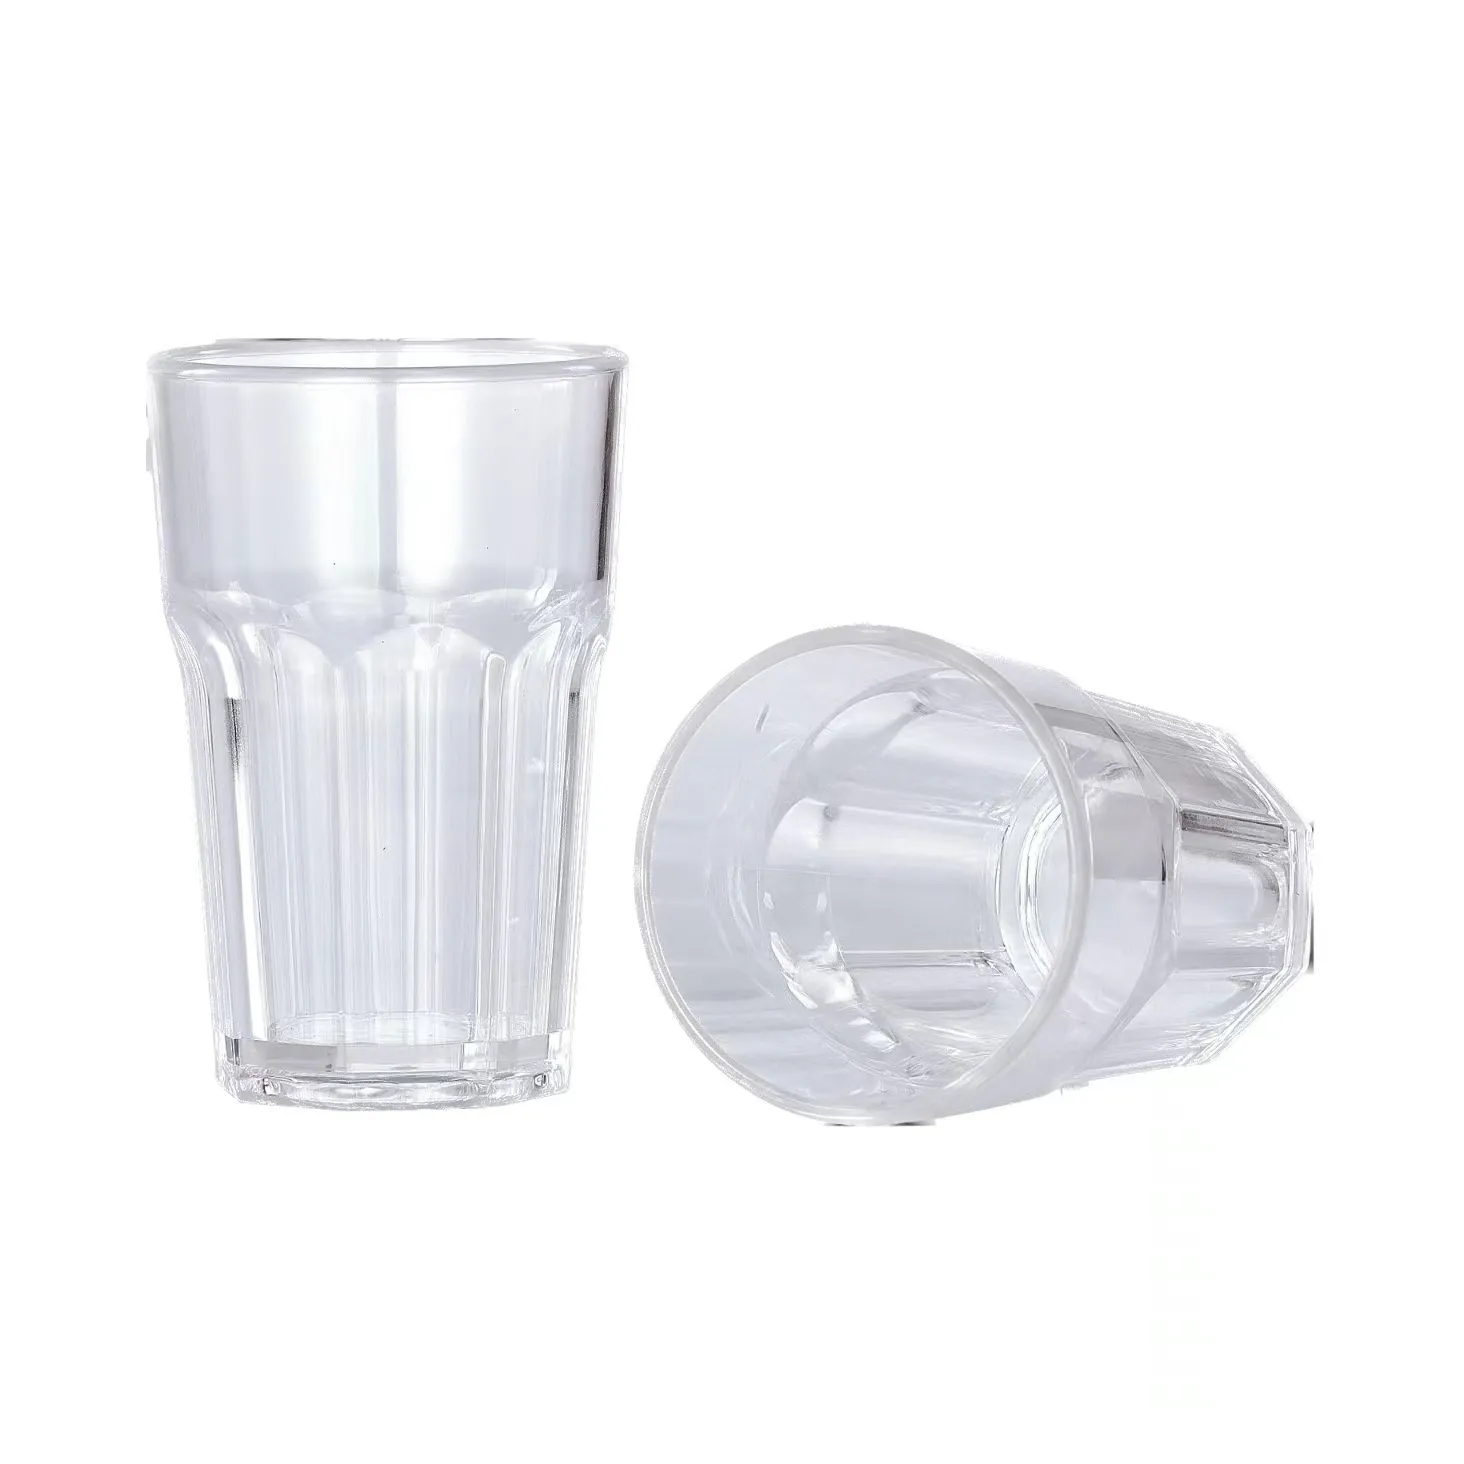 Unbreakable High Octagon Cup Wholesale PS Plastic Shot Glasses Popular Whiskey Acrylic Cup Drinkware